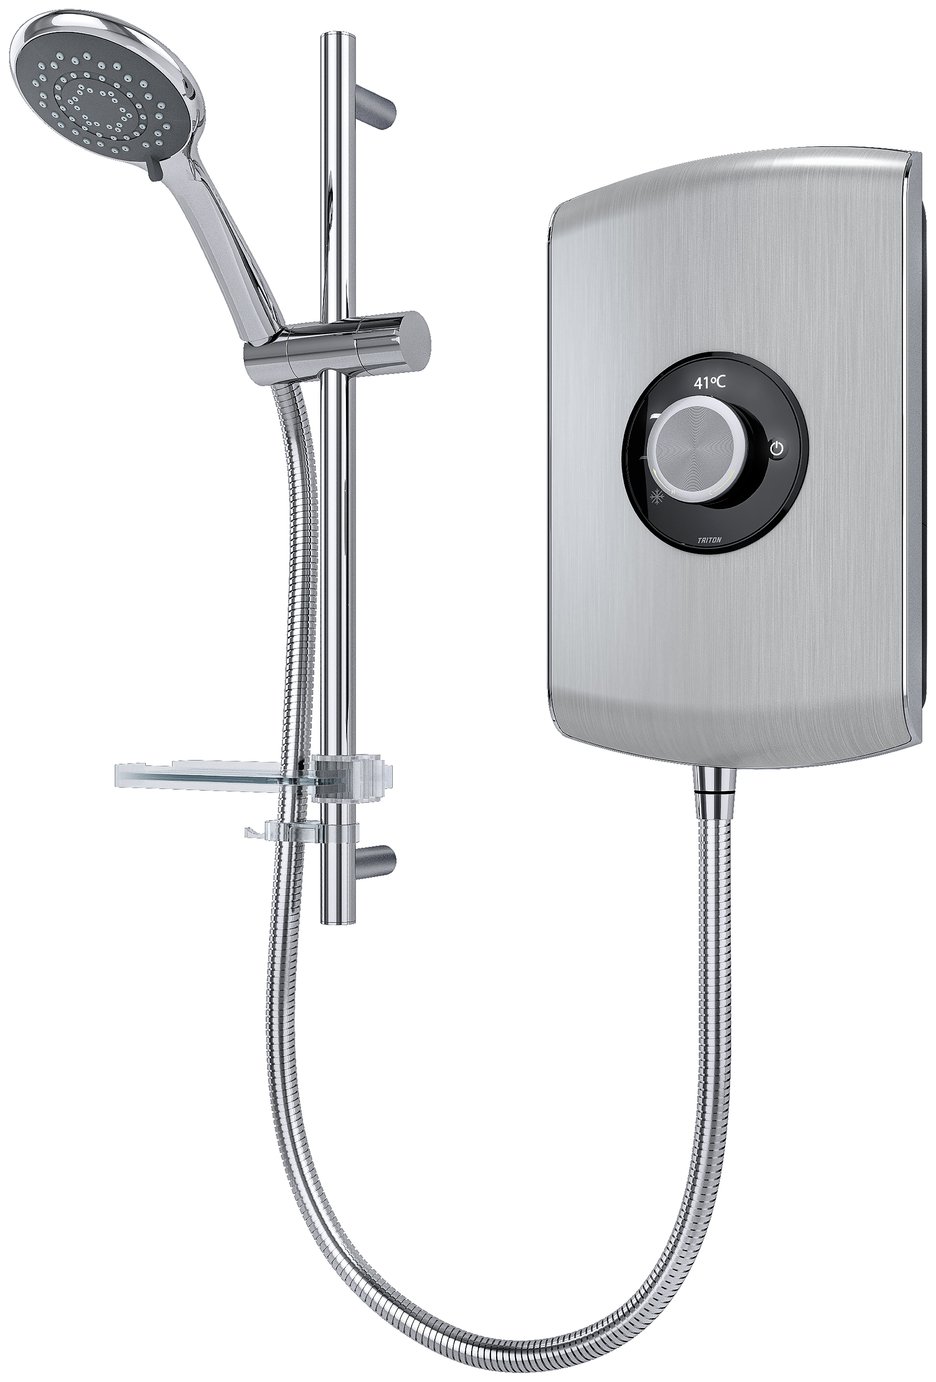 Triton Amore 8.5kW Electric Shower review